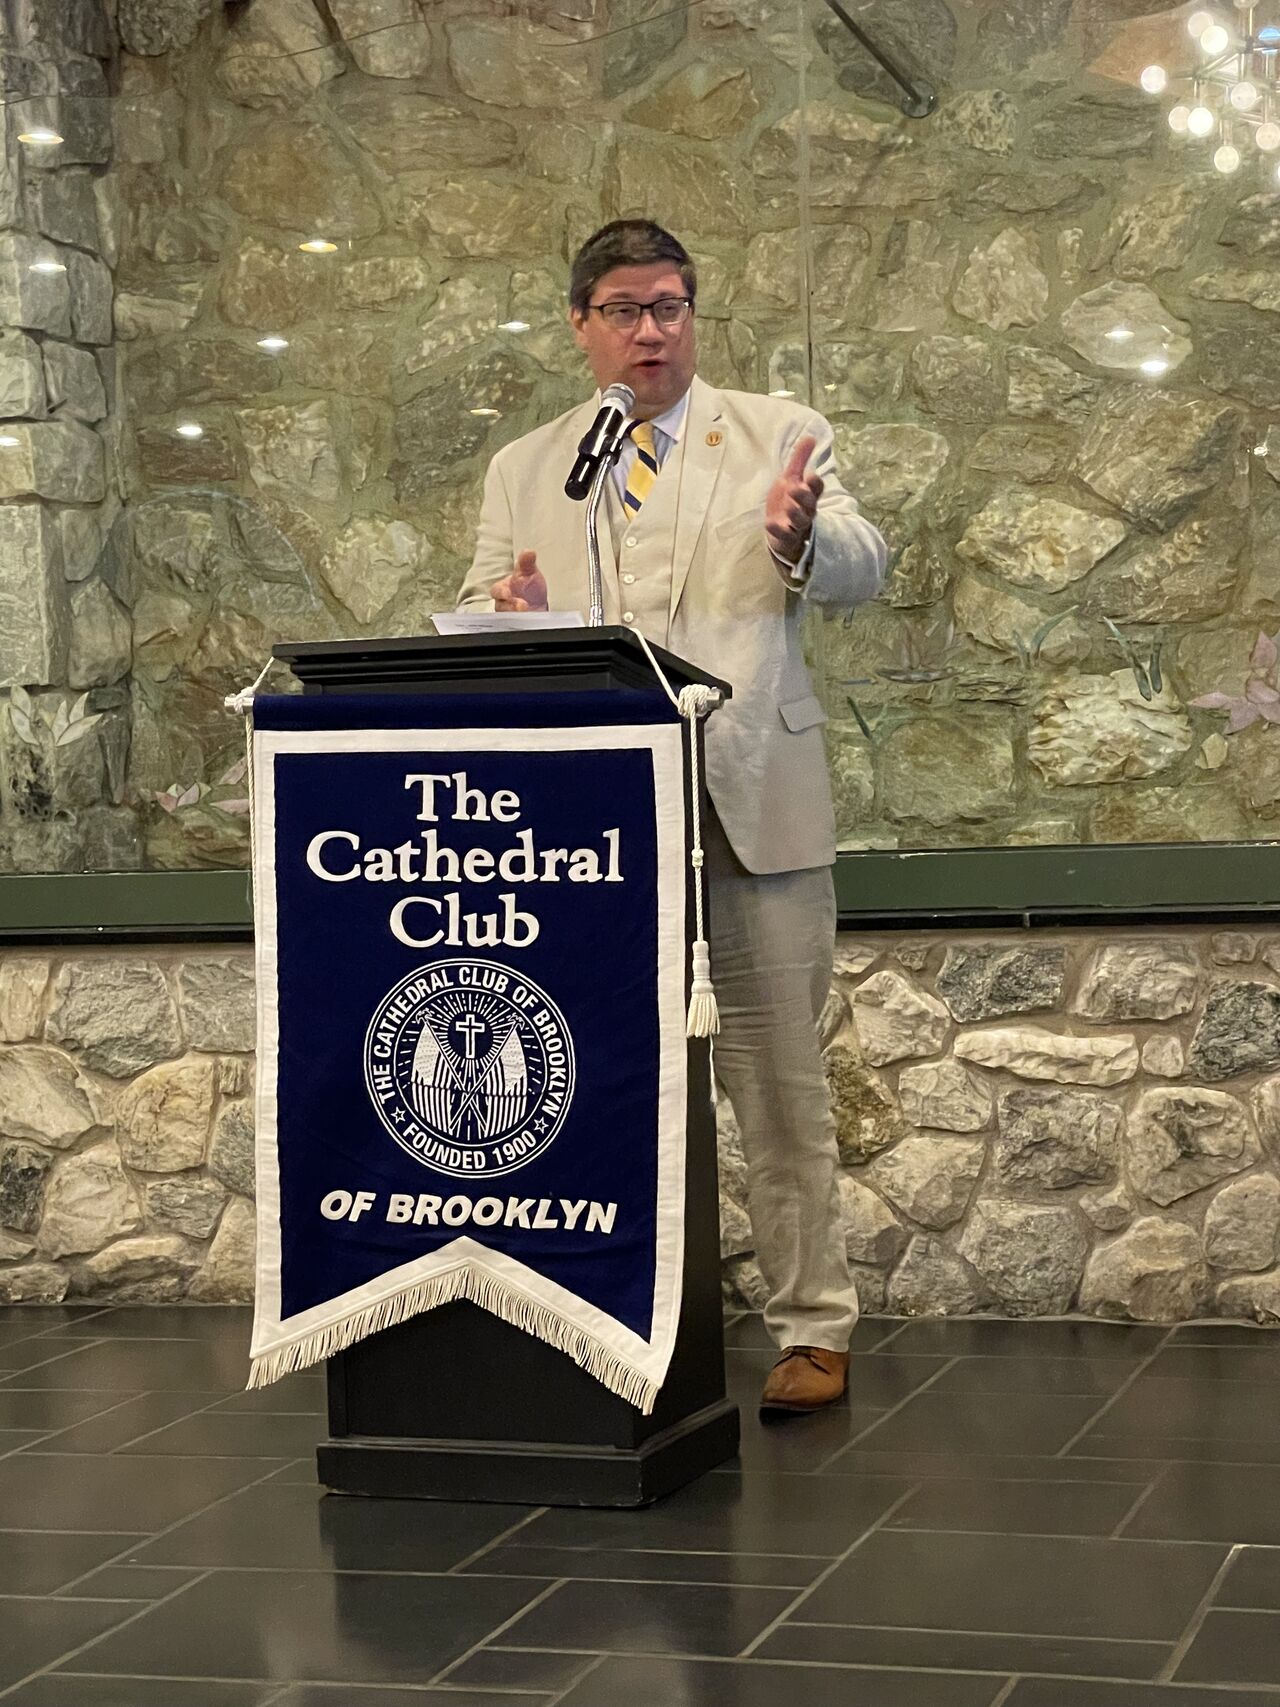 William A. Neri Sr., Esq. delivers a speech at his inauguration as president of the Cathedral Club of Brooklyn during the 125th anniversary celebration.